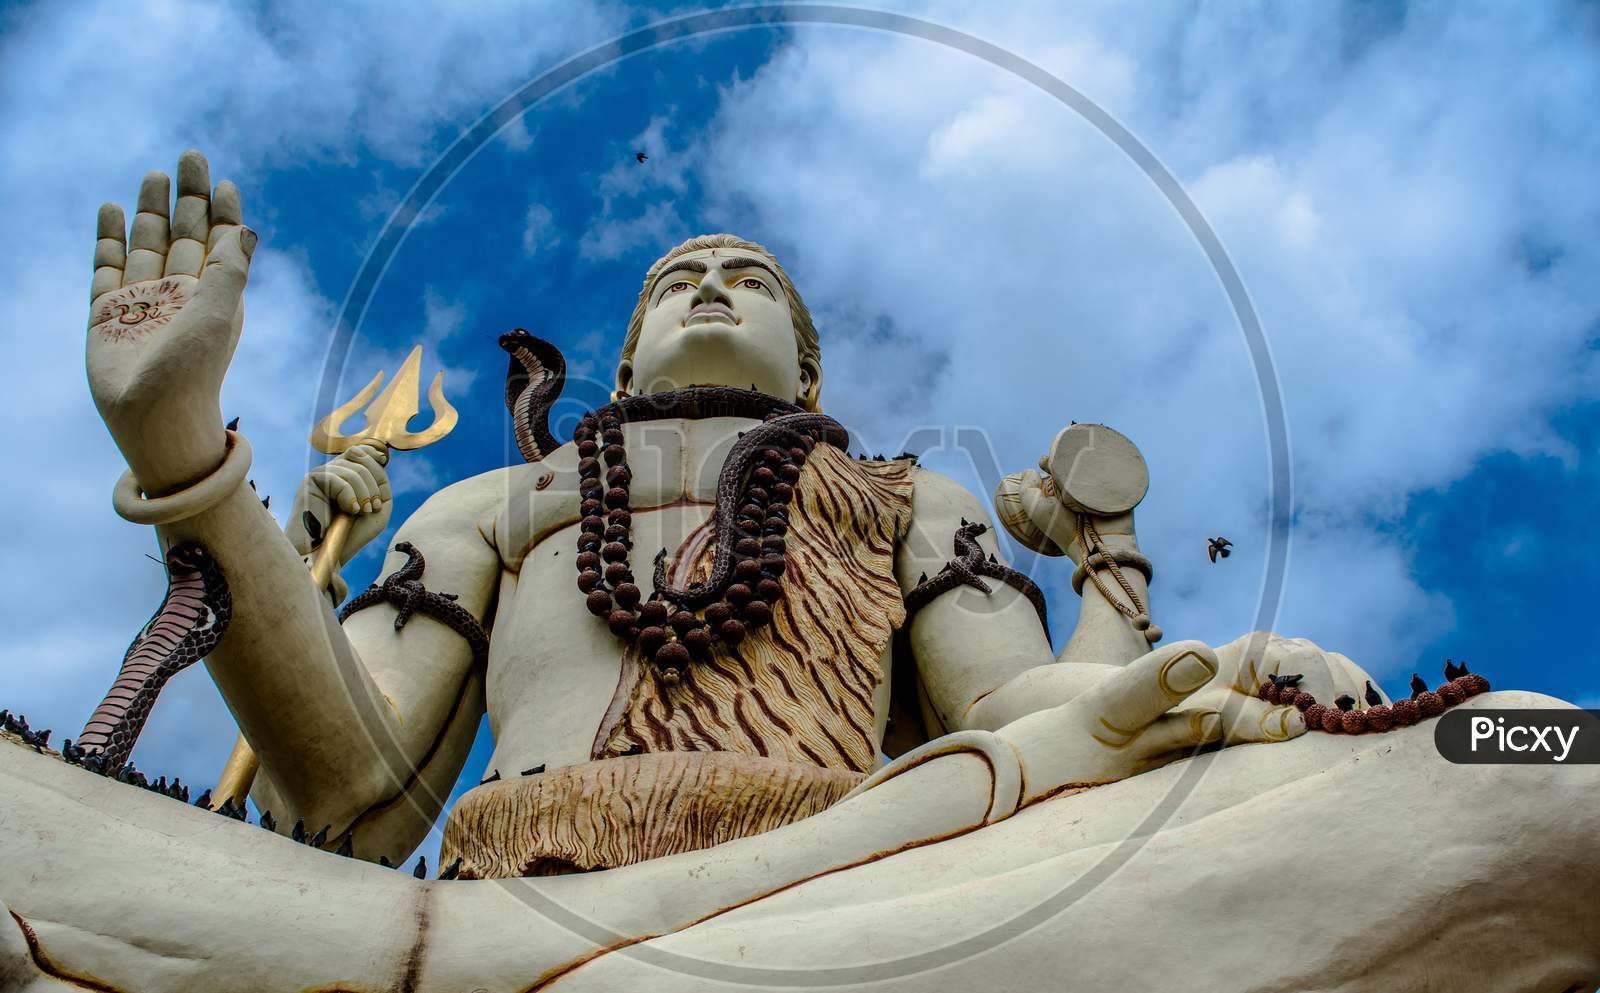 Big shiv statue.Nageshvara is one of the temples mentioned in the Shiva Purana and is one of the twelve Jyotirlingas.